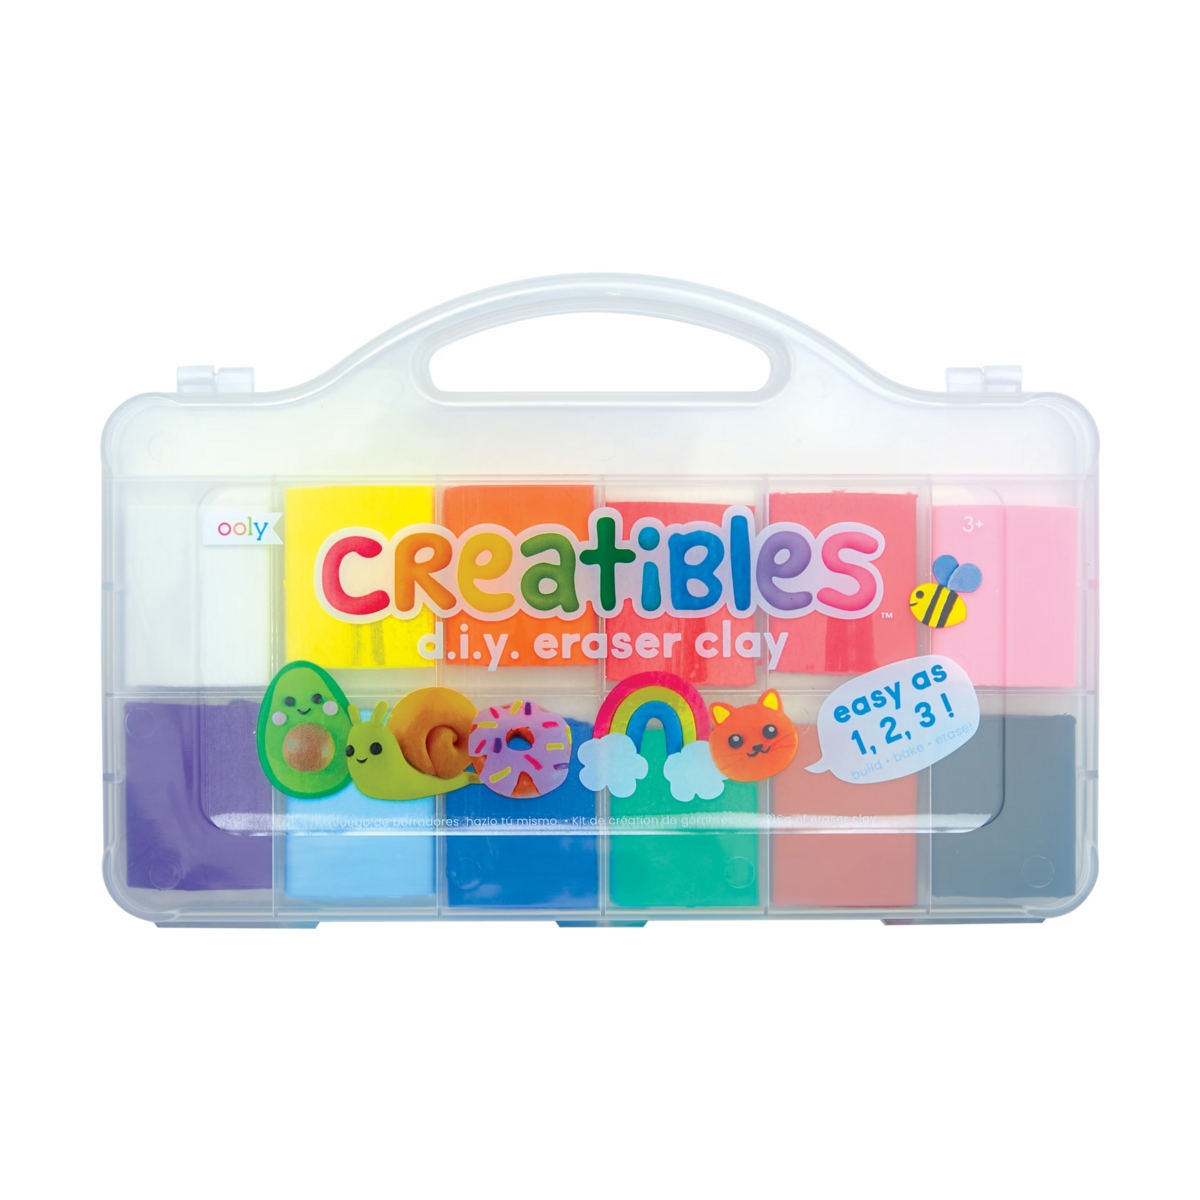 Creatibles DIY Eraser Kit is a simple and complete kit for making your own erasers with 12 different colored clays